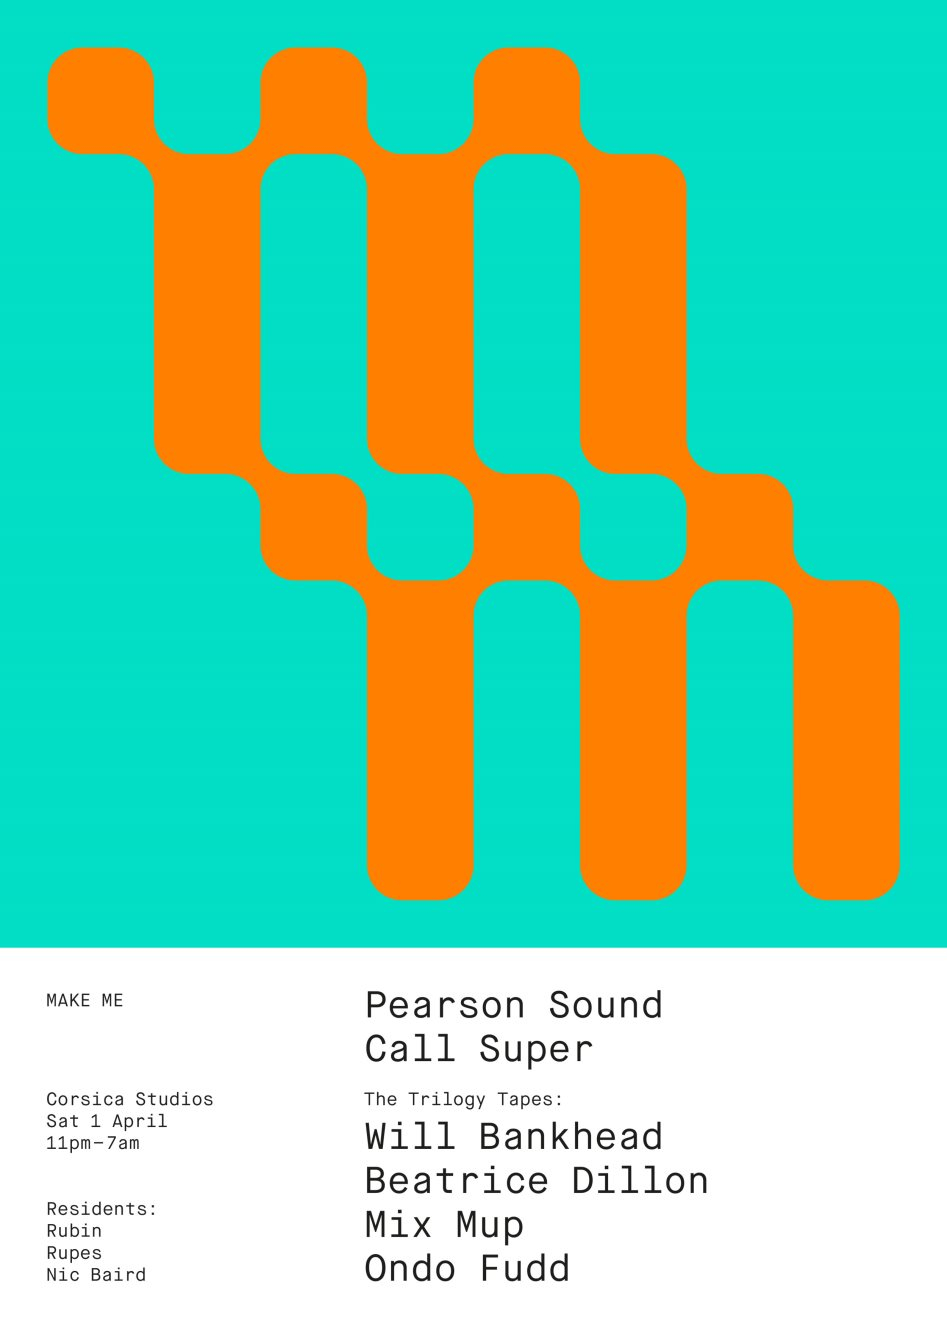 Make Me with Pearson Sound, Call Super and The Trilogy Tapes - Flyer front